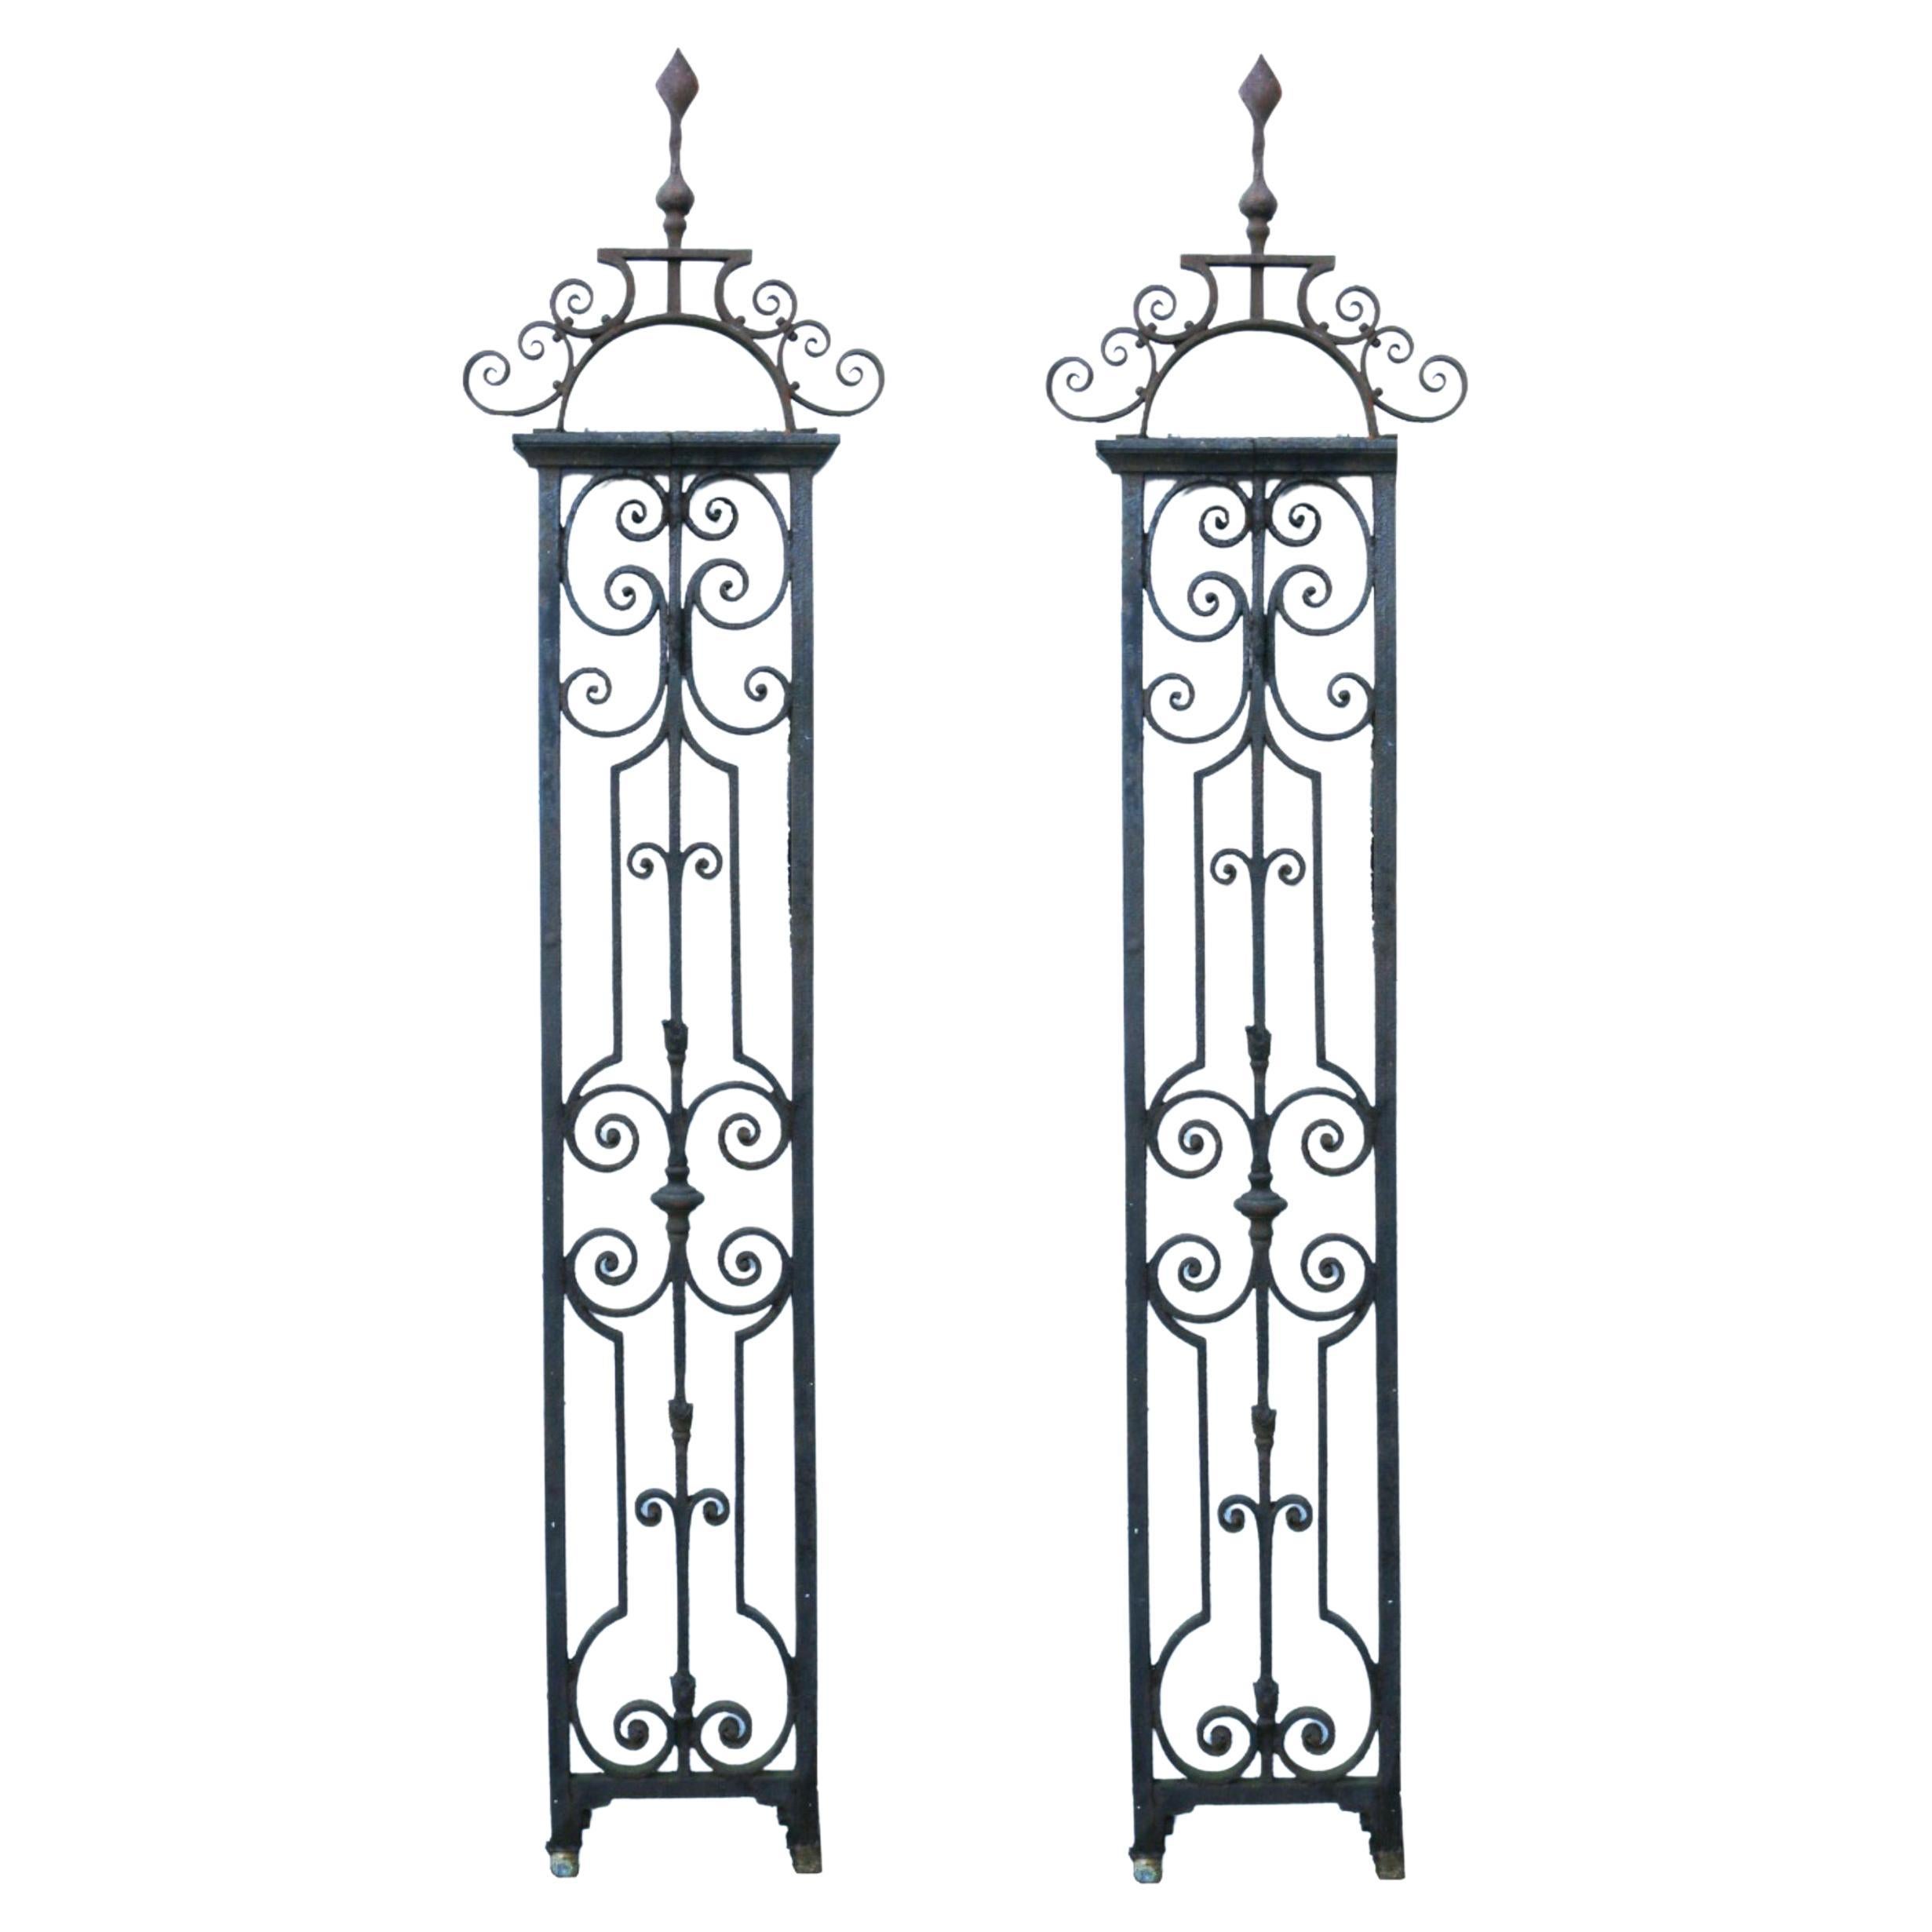 Pair of Antique Wrought Iron Gate Posts or Piers